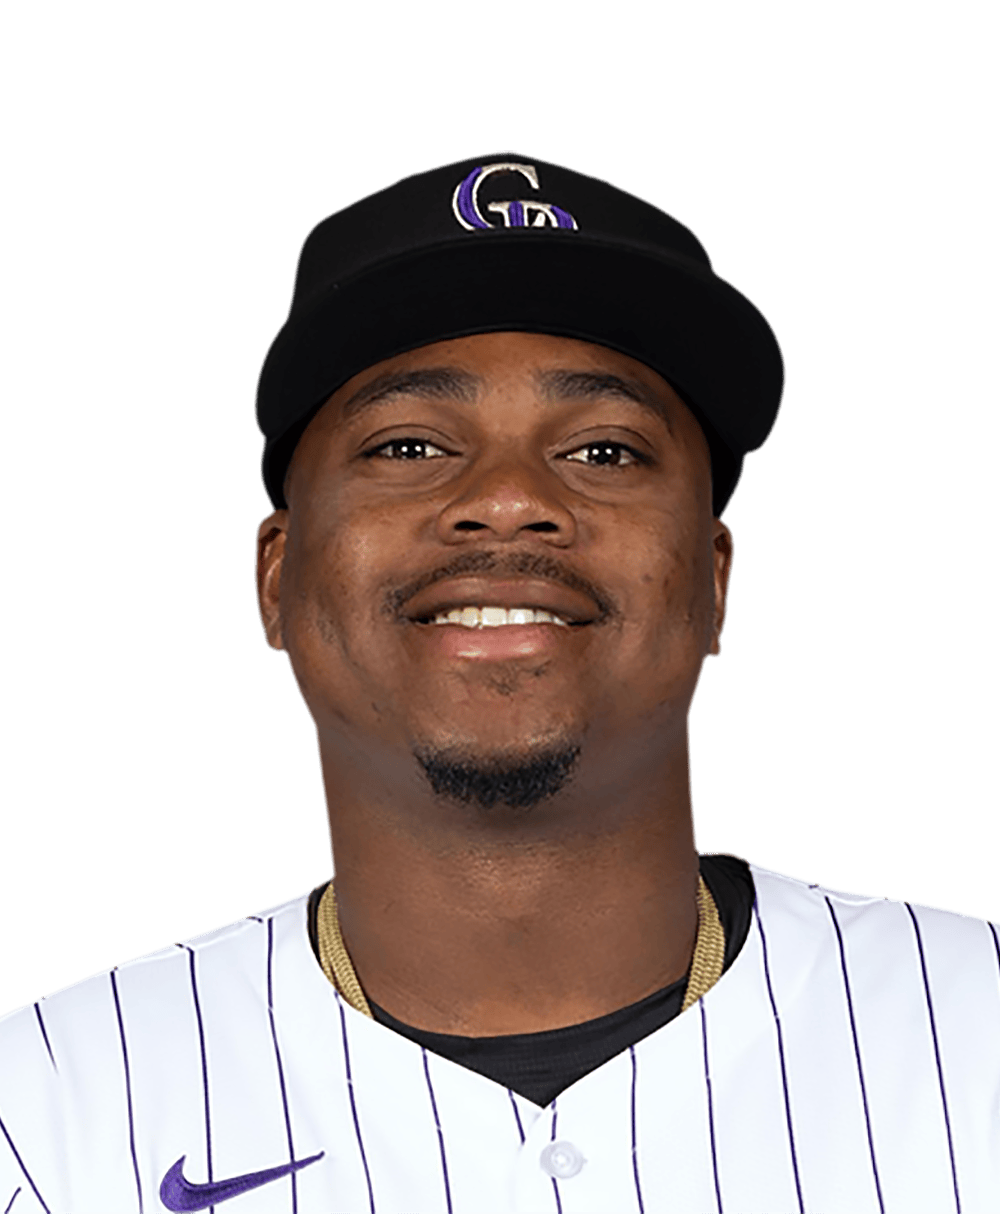 Rockies rough up Pirates on 11 hits, including a pair of Jurickson